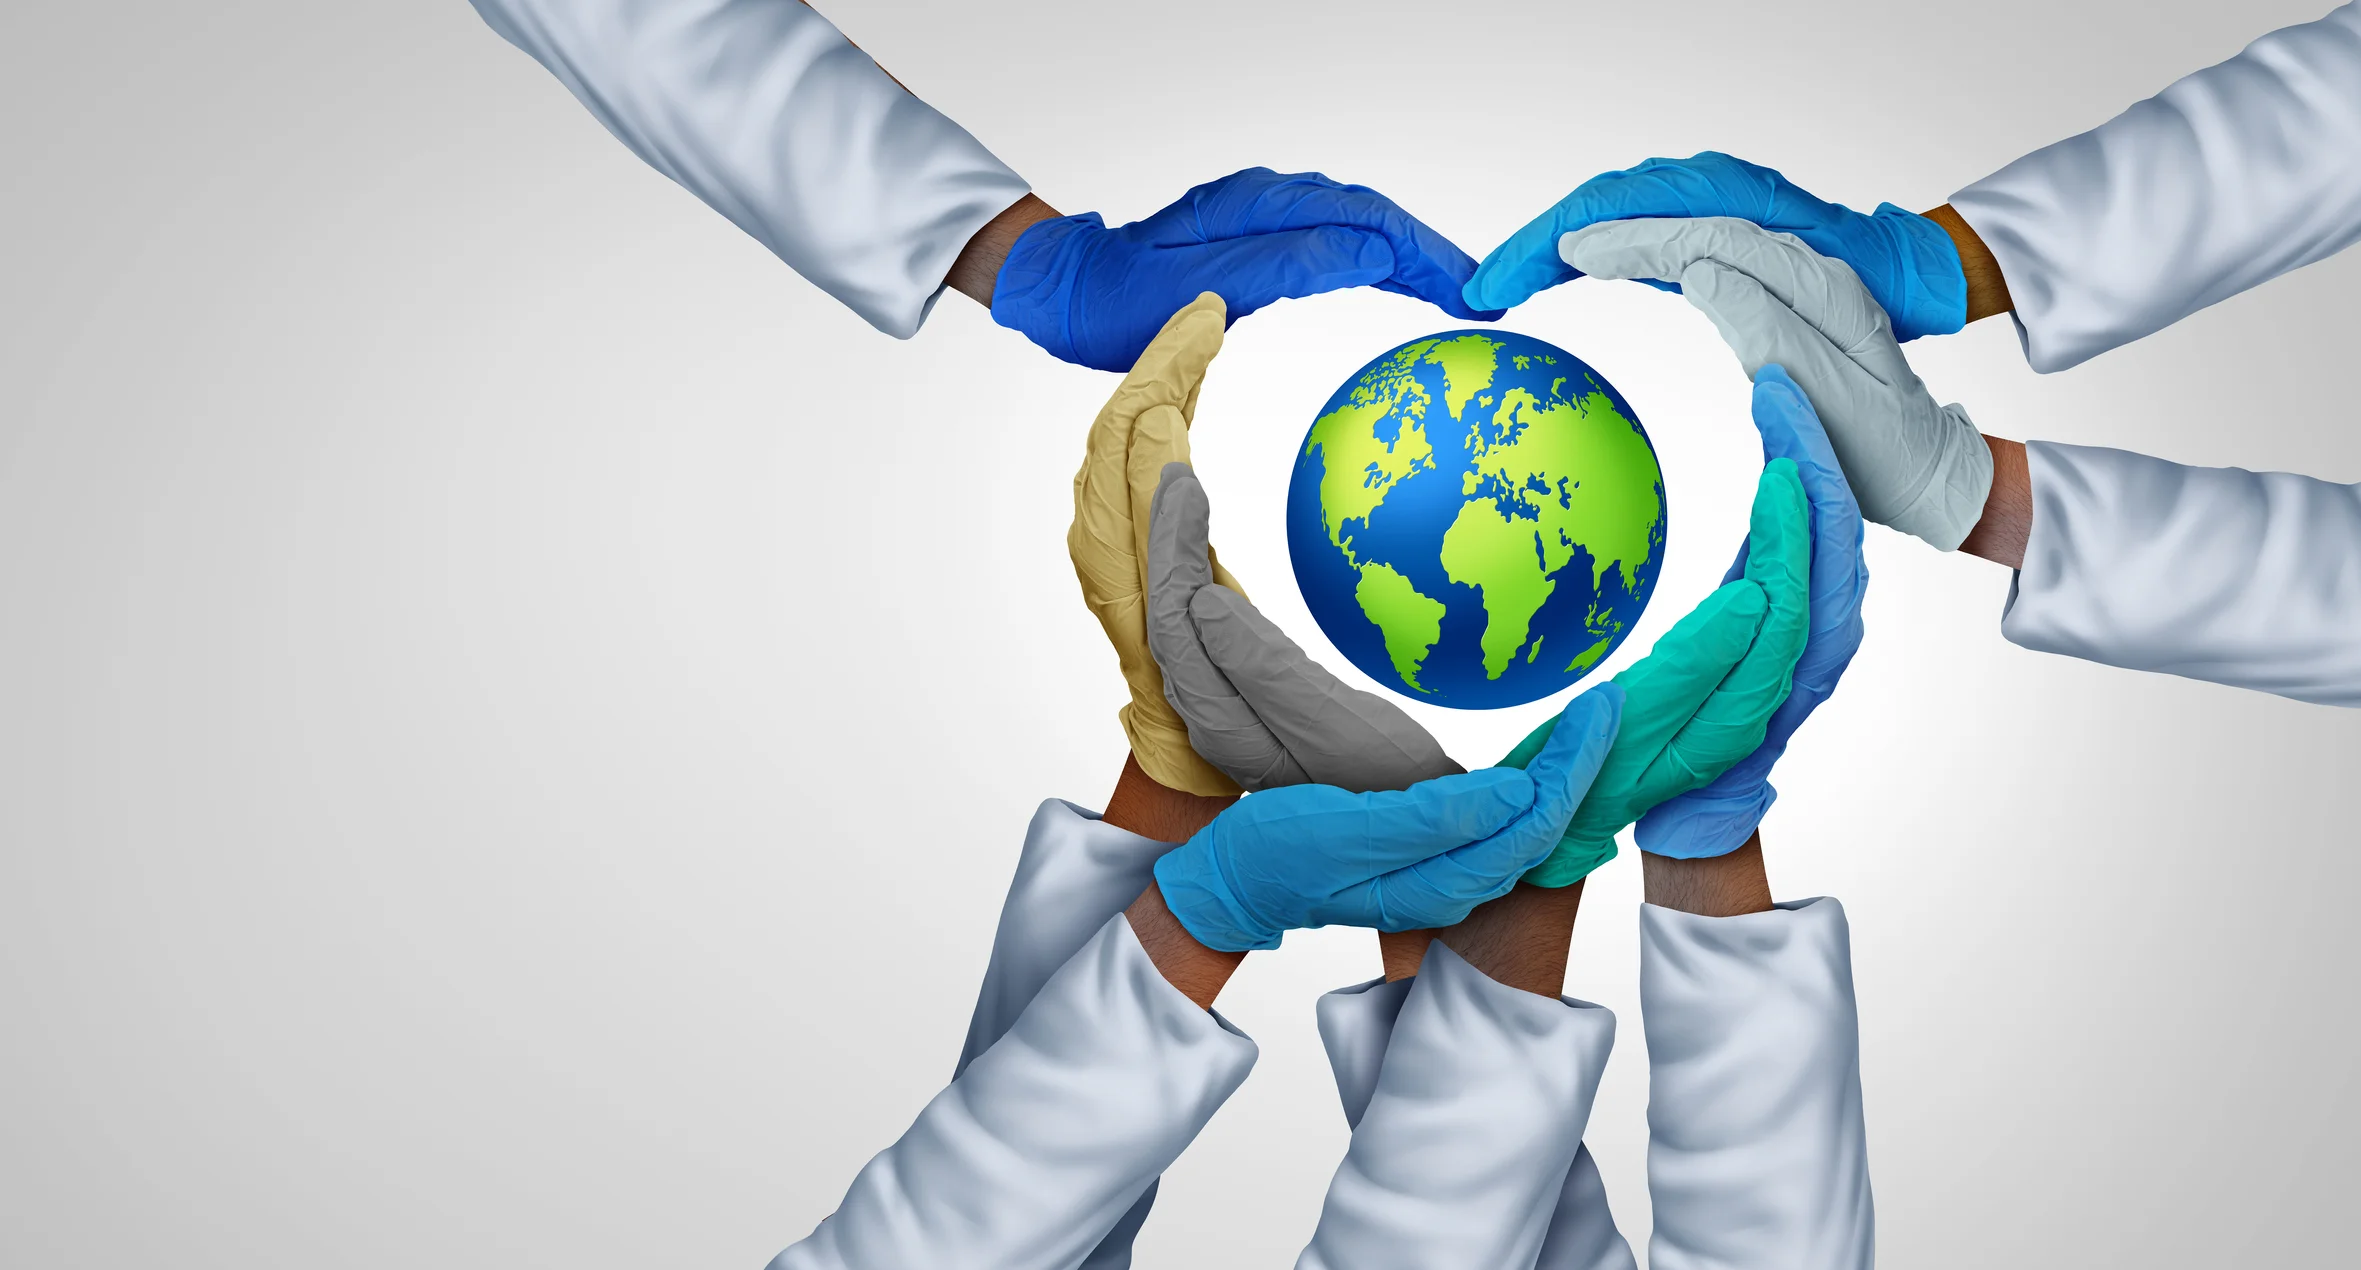 Gloved hands holding a globe, symbolizing global healthcare services and travel opportunities at a healthcare agency.